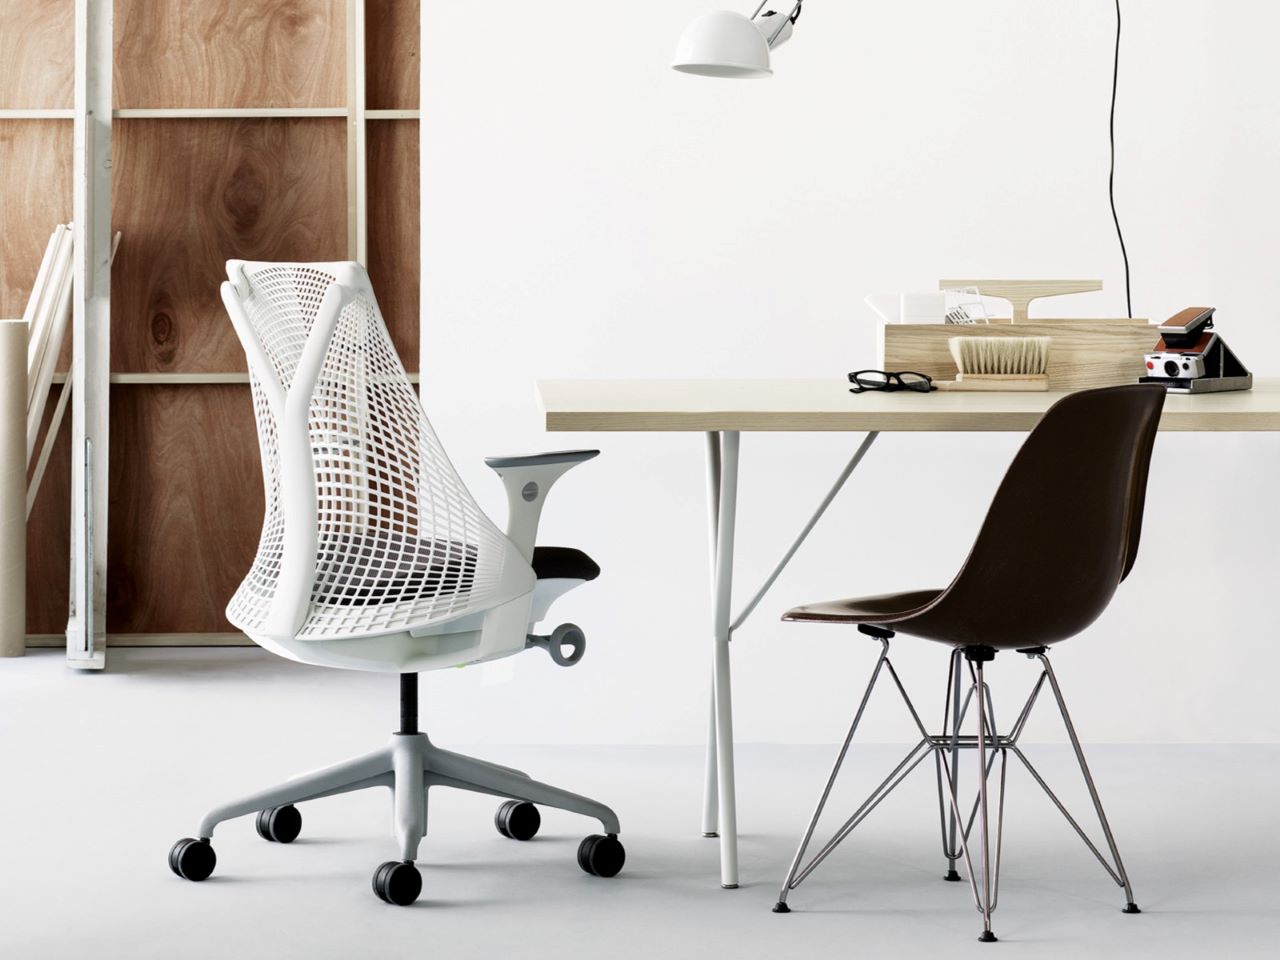 Sayl, one of the ideal chairs for recording studio, has unframed 3D Intelligent back that lets you stretch and move, striking a healthy balance between support and freedom.